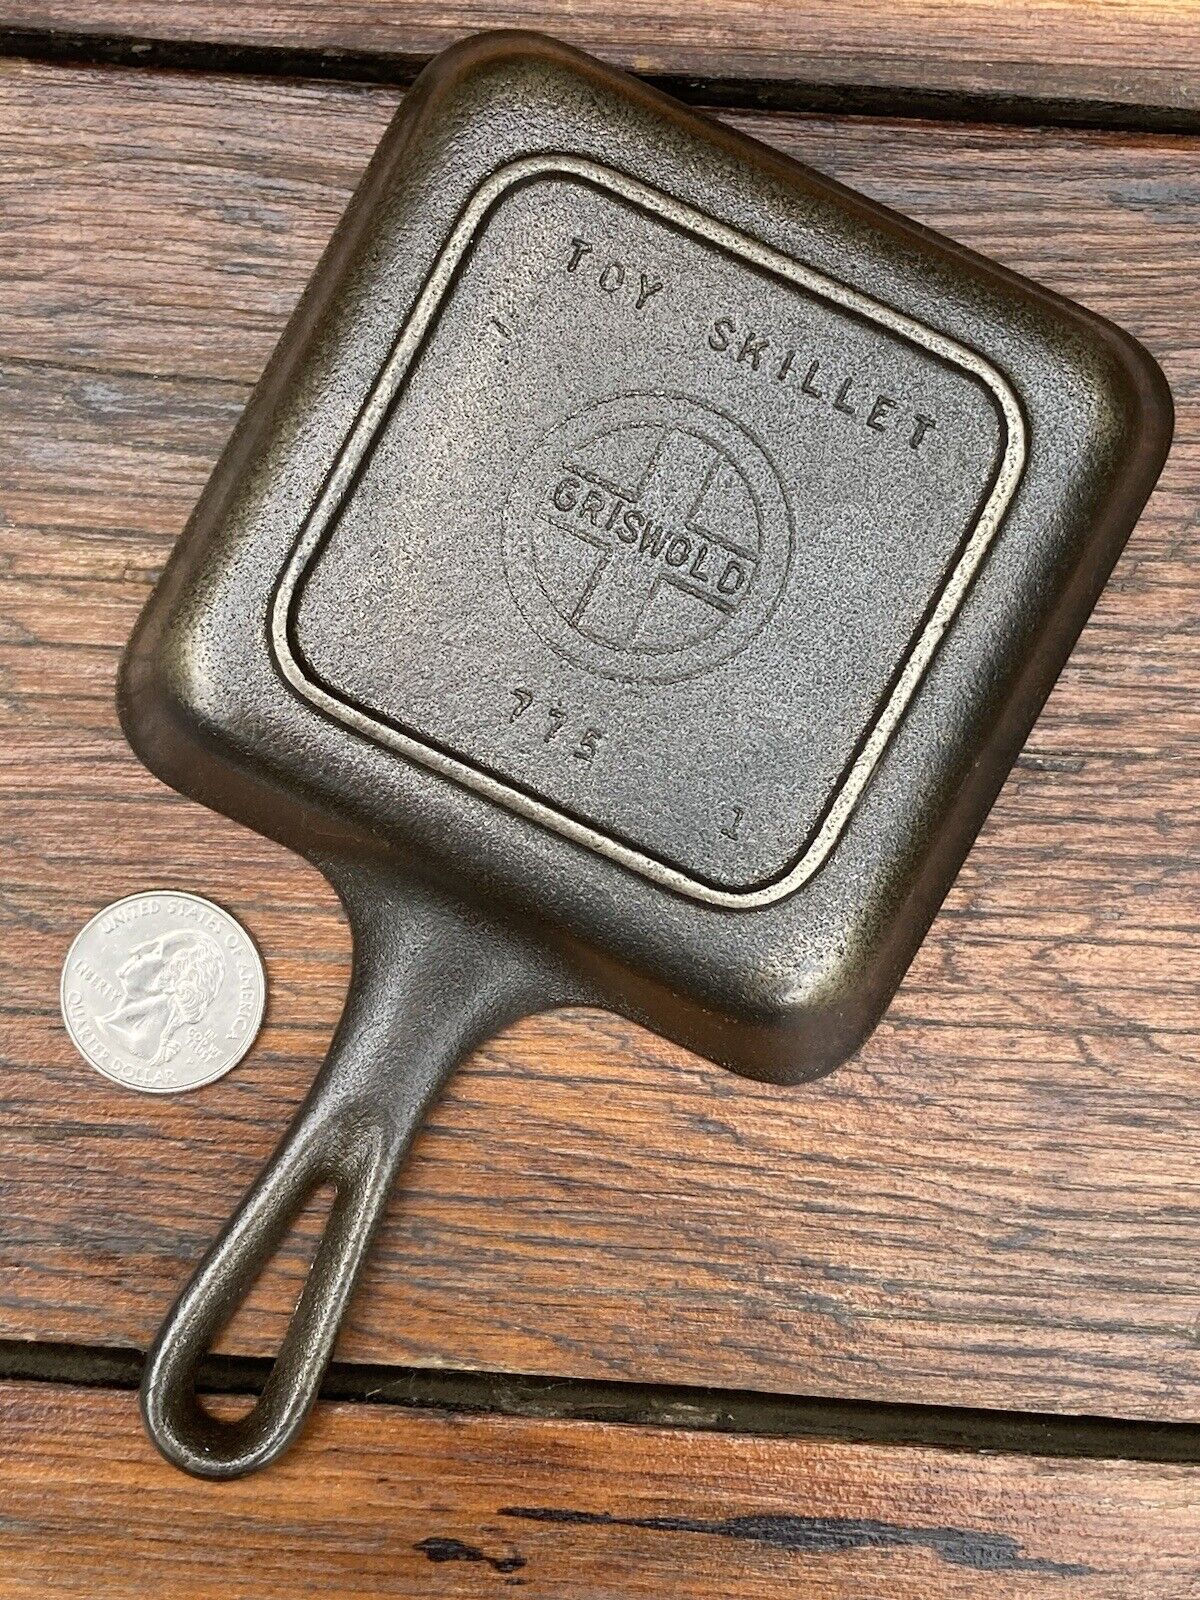 Griswold Cast Iron Square Toy Skillet #775